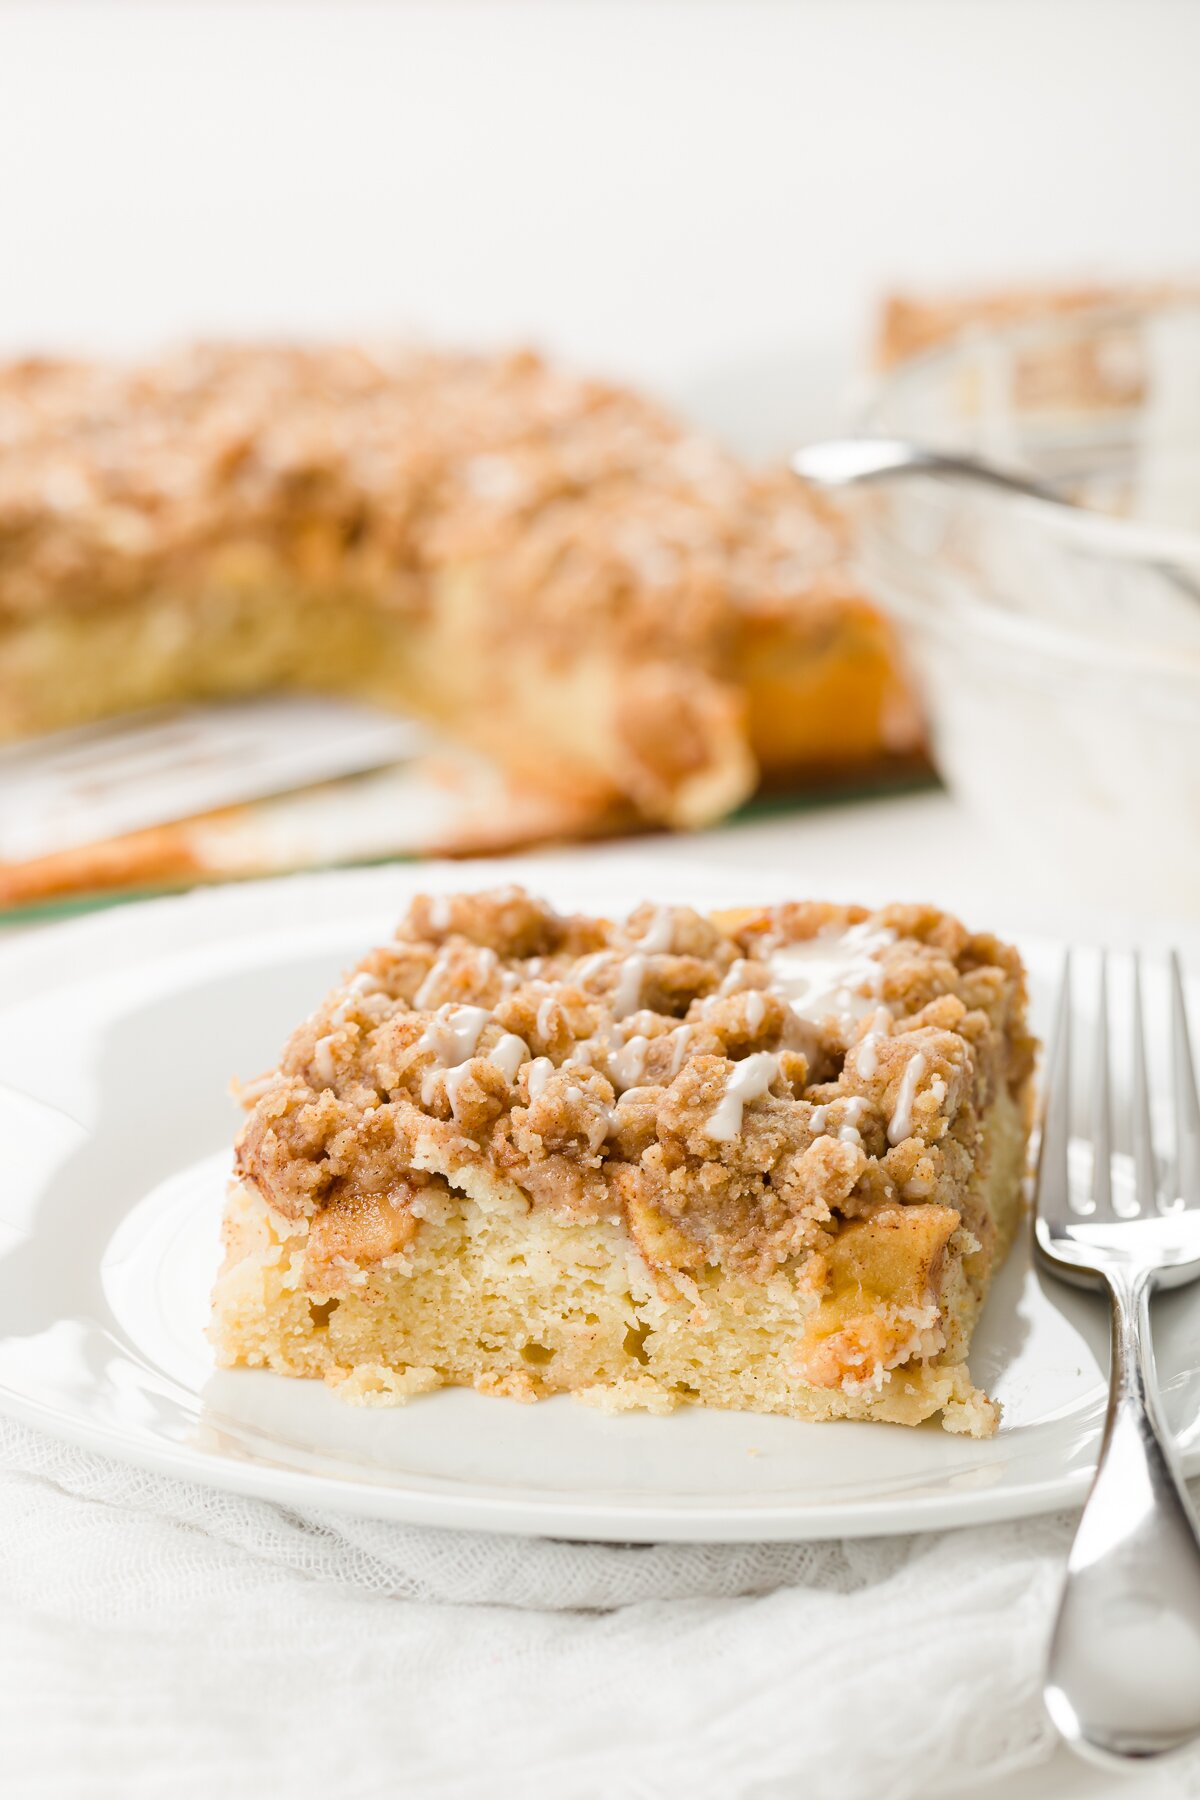 Slice of apple crumb cake with the cake in the background